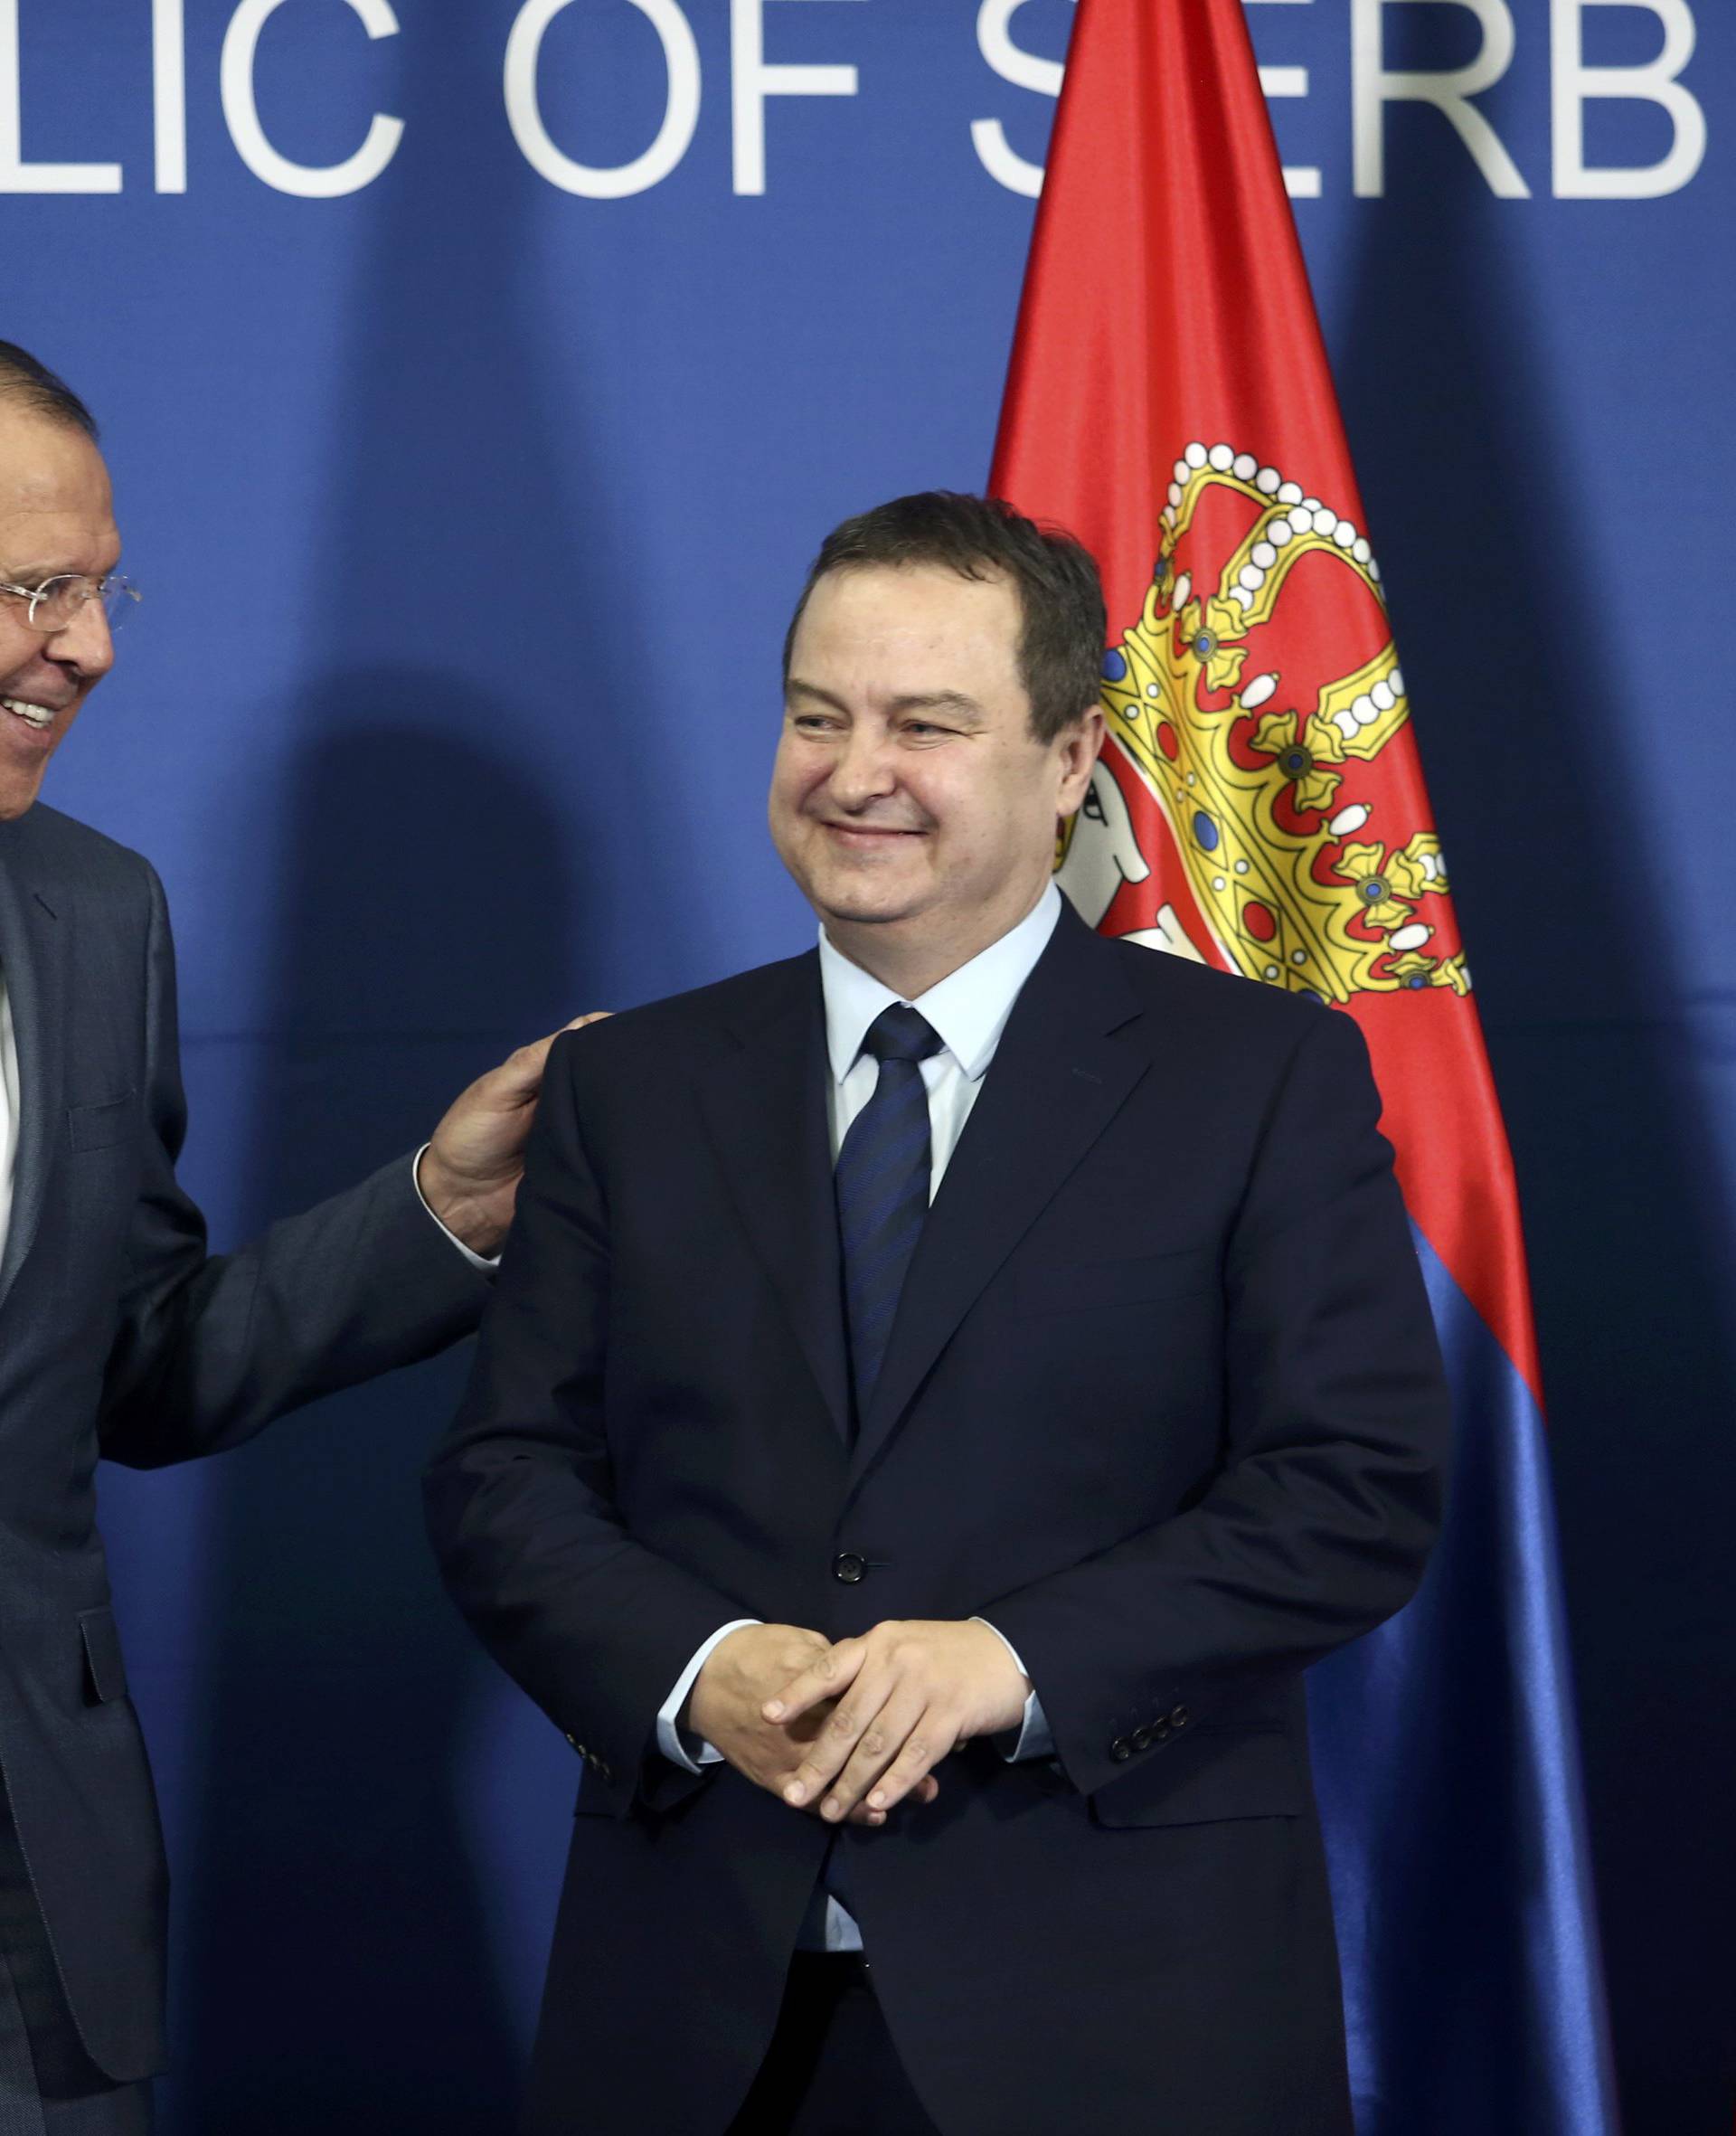 Serbian Foreign Minister Dacic and his Russian counterpart Lavrov arrive for a press conference in Belgrade